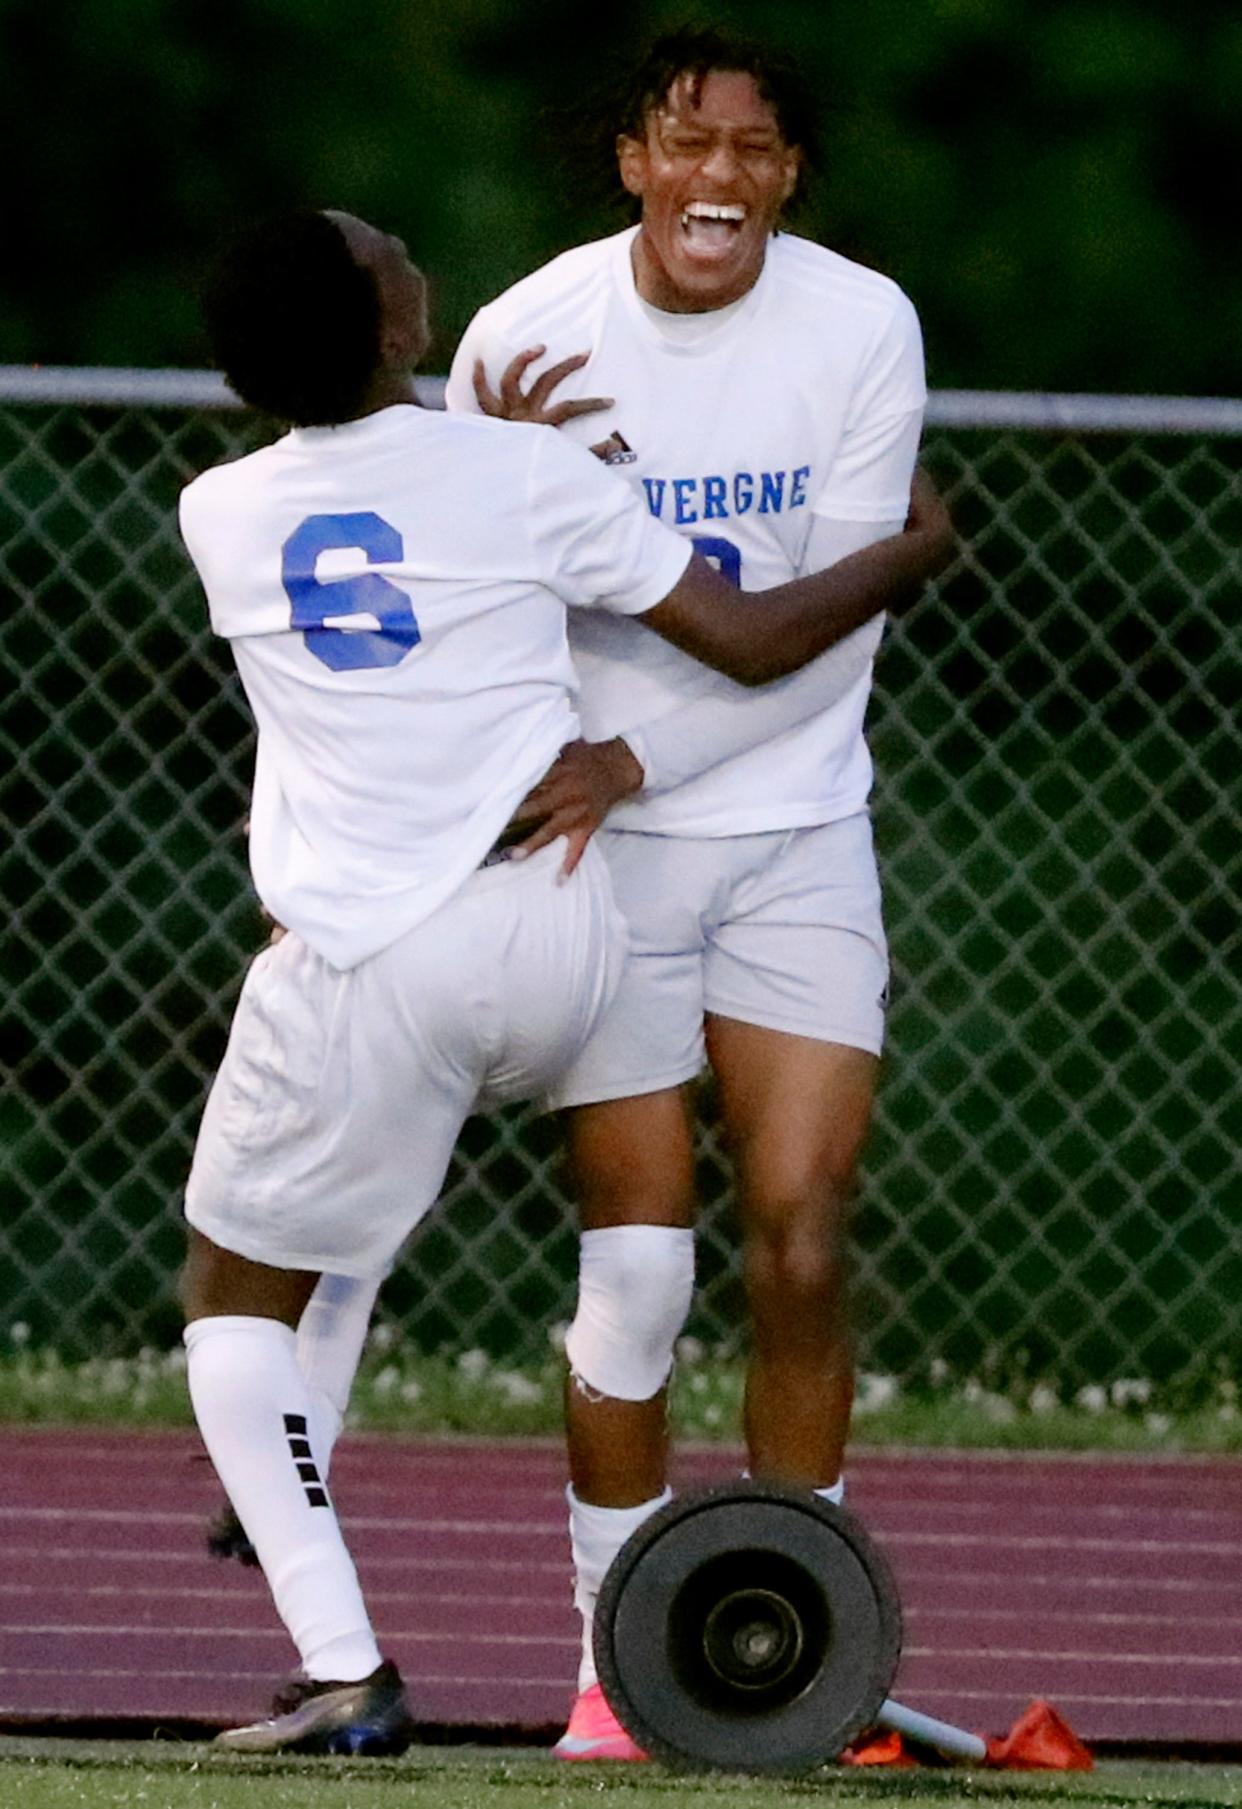 La Vergne senior Jordan Beslin (9) celebrates a goal with teammate Nico Escobar (6) during Tuesday's Region 4-AAA soccer semifinals against Blackman. Beslin scored two goals, giving him 31 on the season.